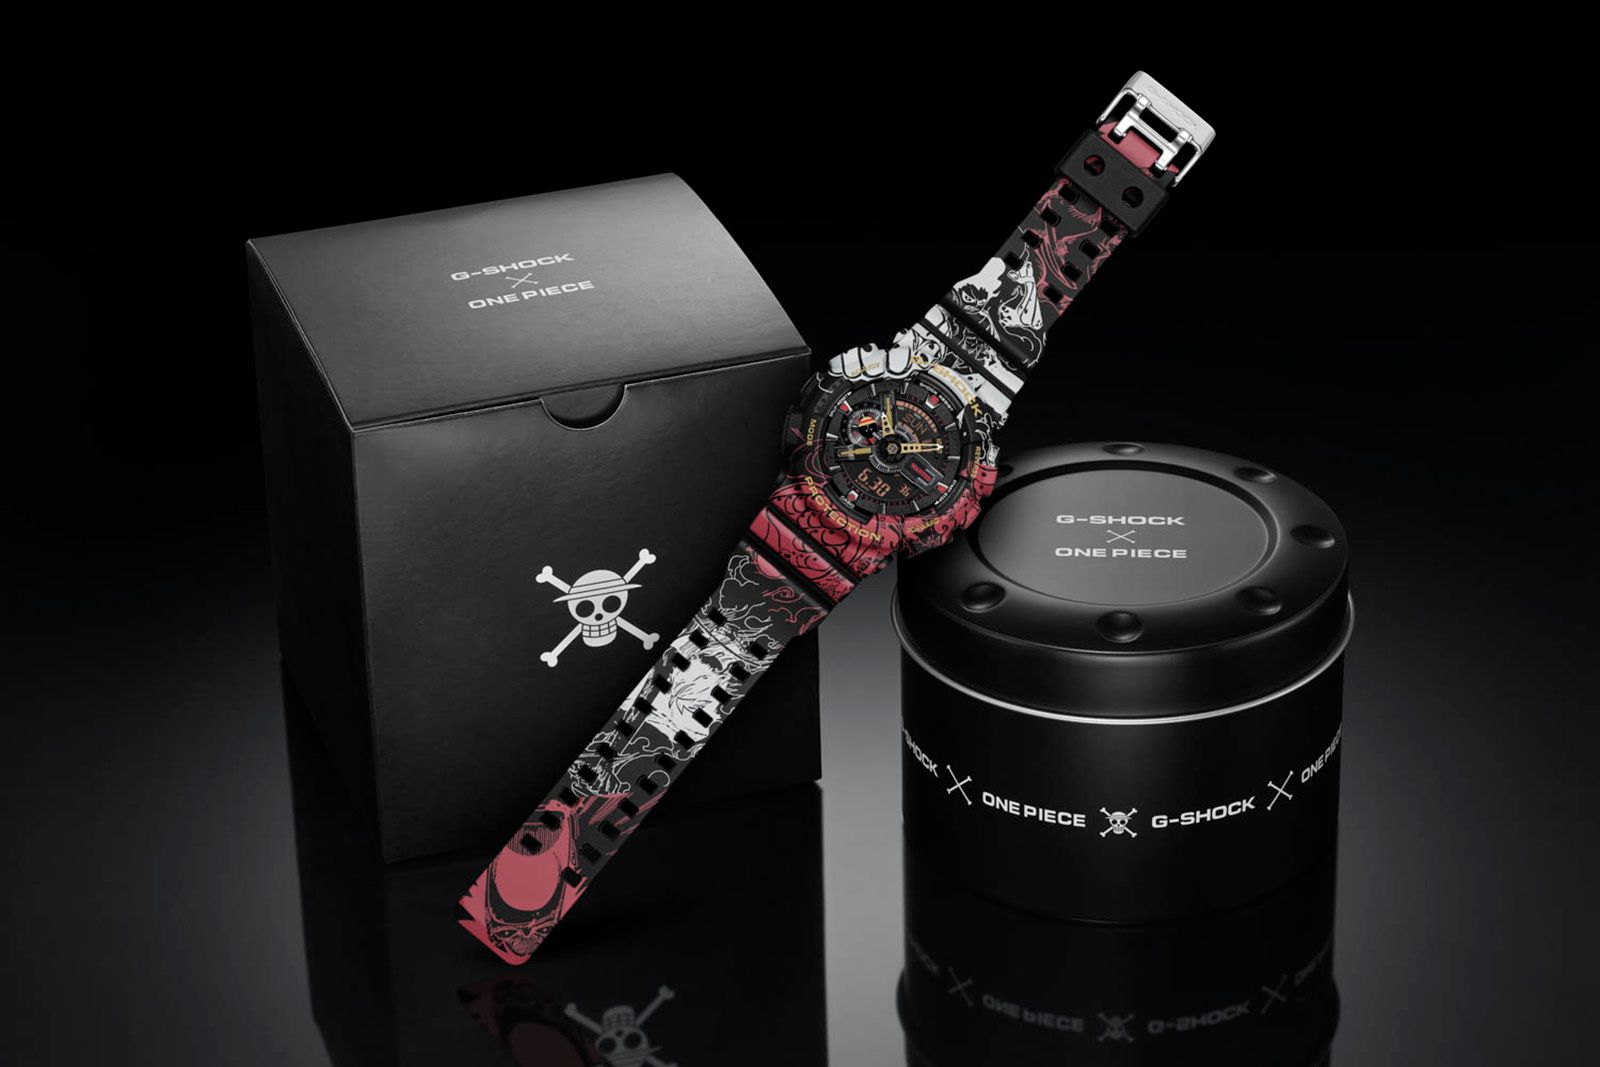 Casio G-Shock x One Piece is another instant classic watch